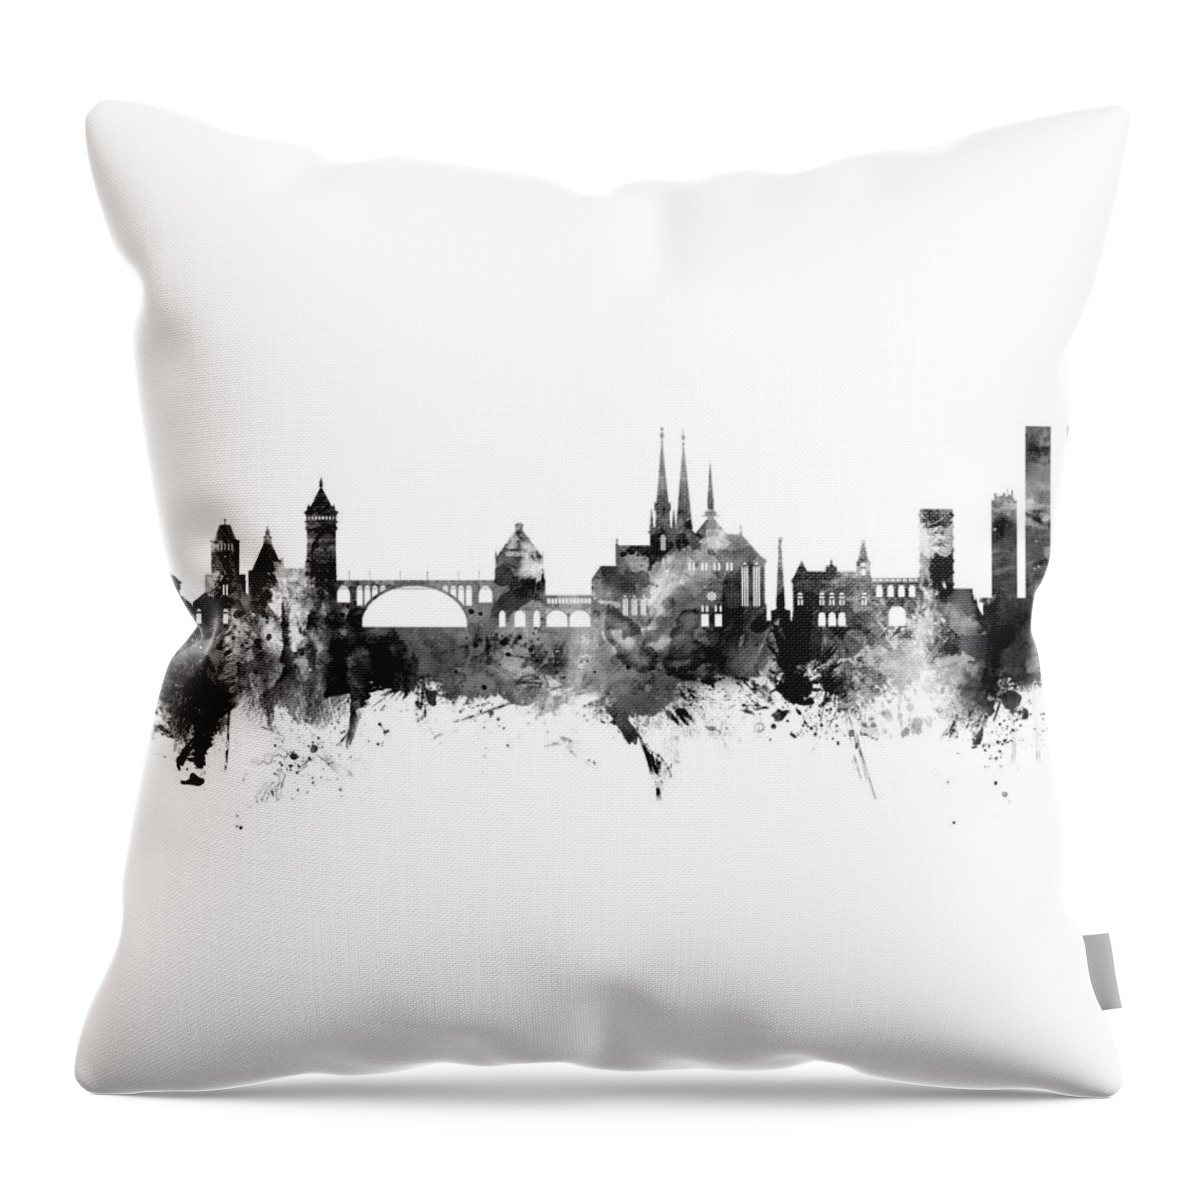 Luxembourg City Throw Pillow featuring the digital art Luxembourg City Skyline by Michael Tompsett